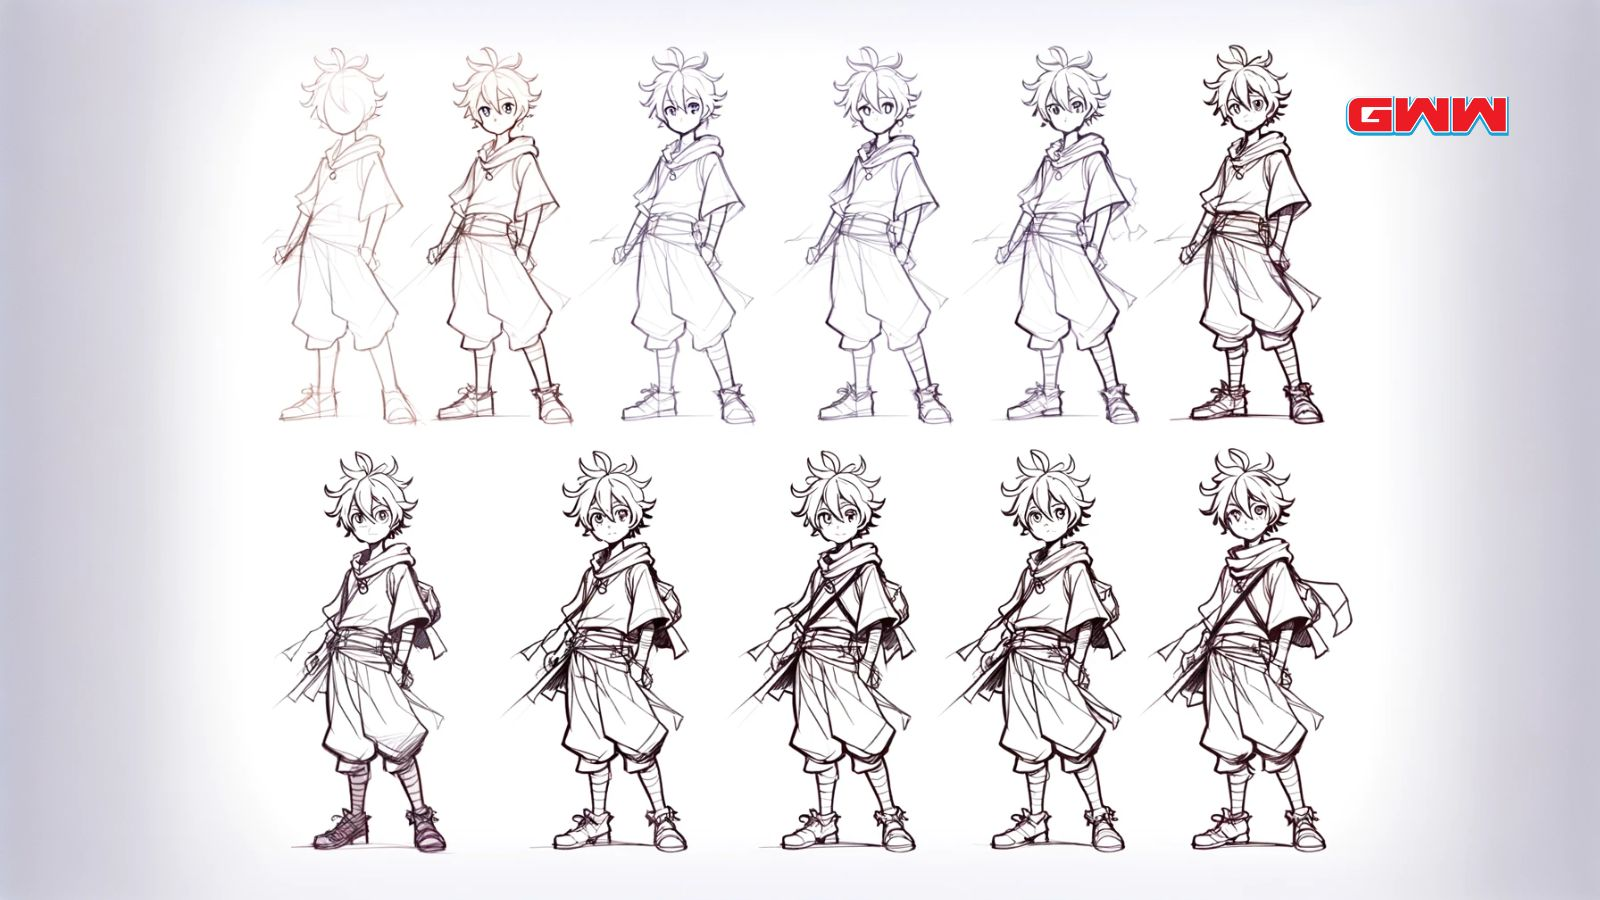 A series of pencil sketch of standing anime body poses from start to finish